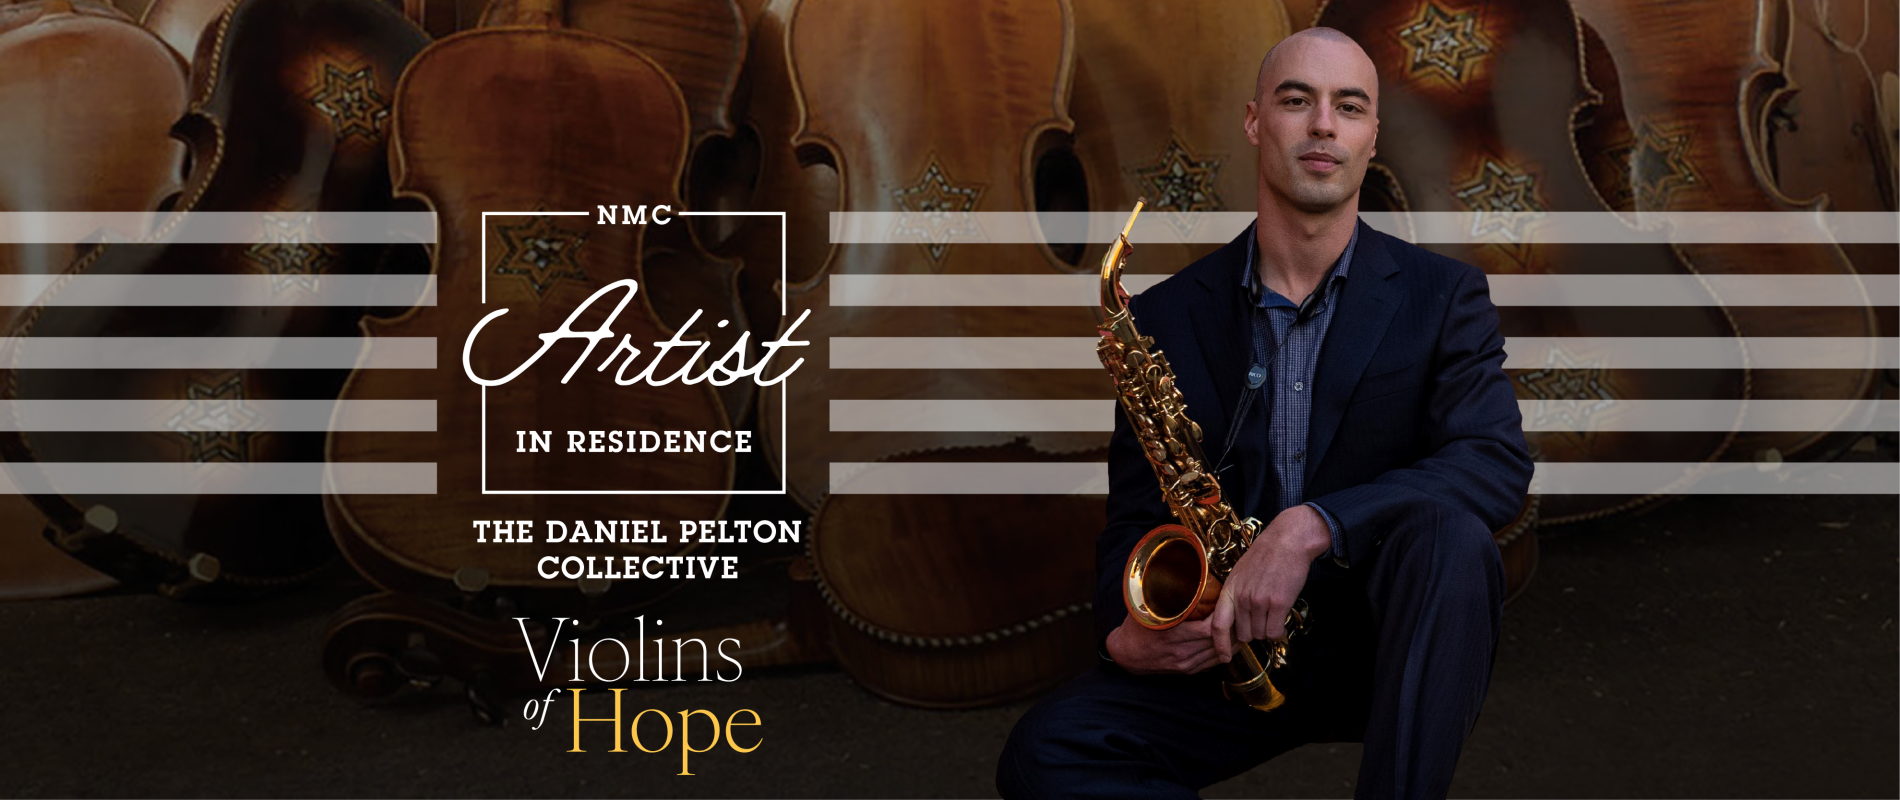 National Music Centre Announces The Daniel Pelton Collective as Violins of Hope Artist in Residence